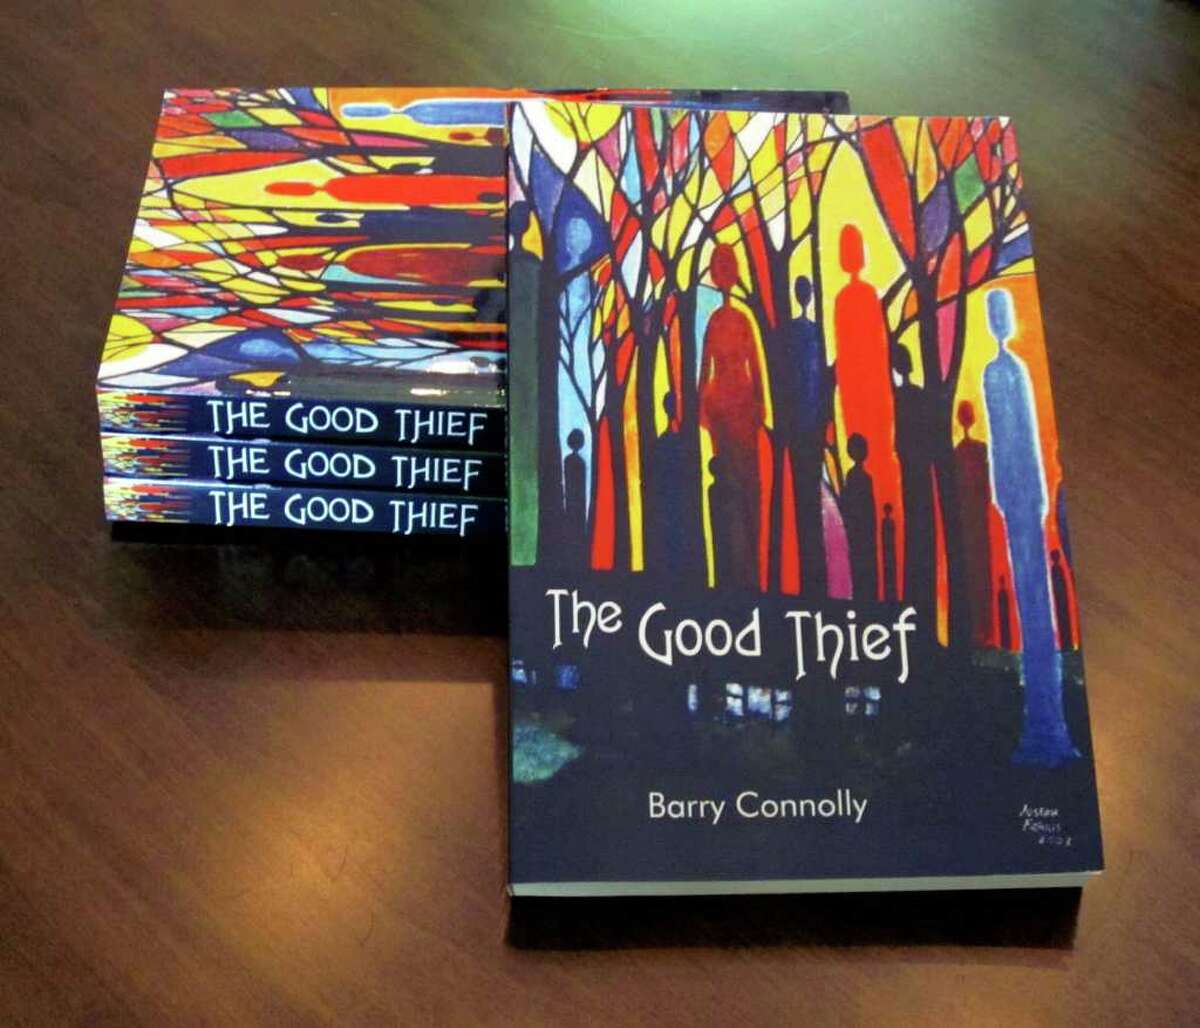 "The Good Thief" is the first novel published by Bethel resident Barry Connolly. The cover art is by Joseph Farris.